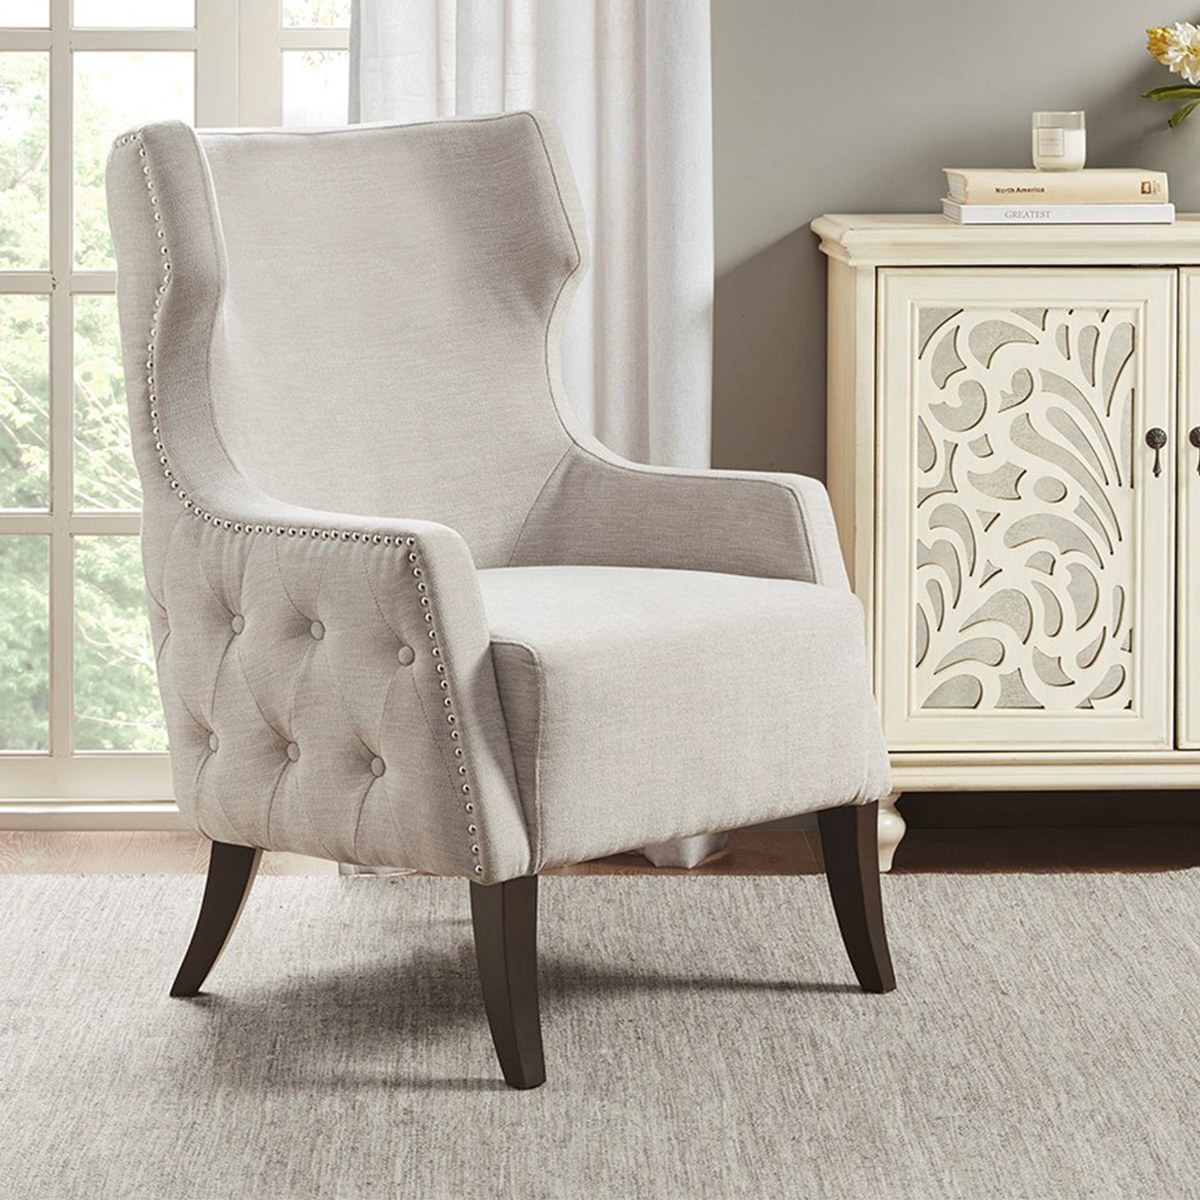 Picture of CORSICCAN ACCENT CHAIR